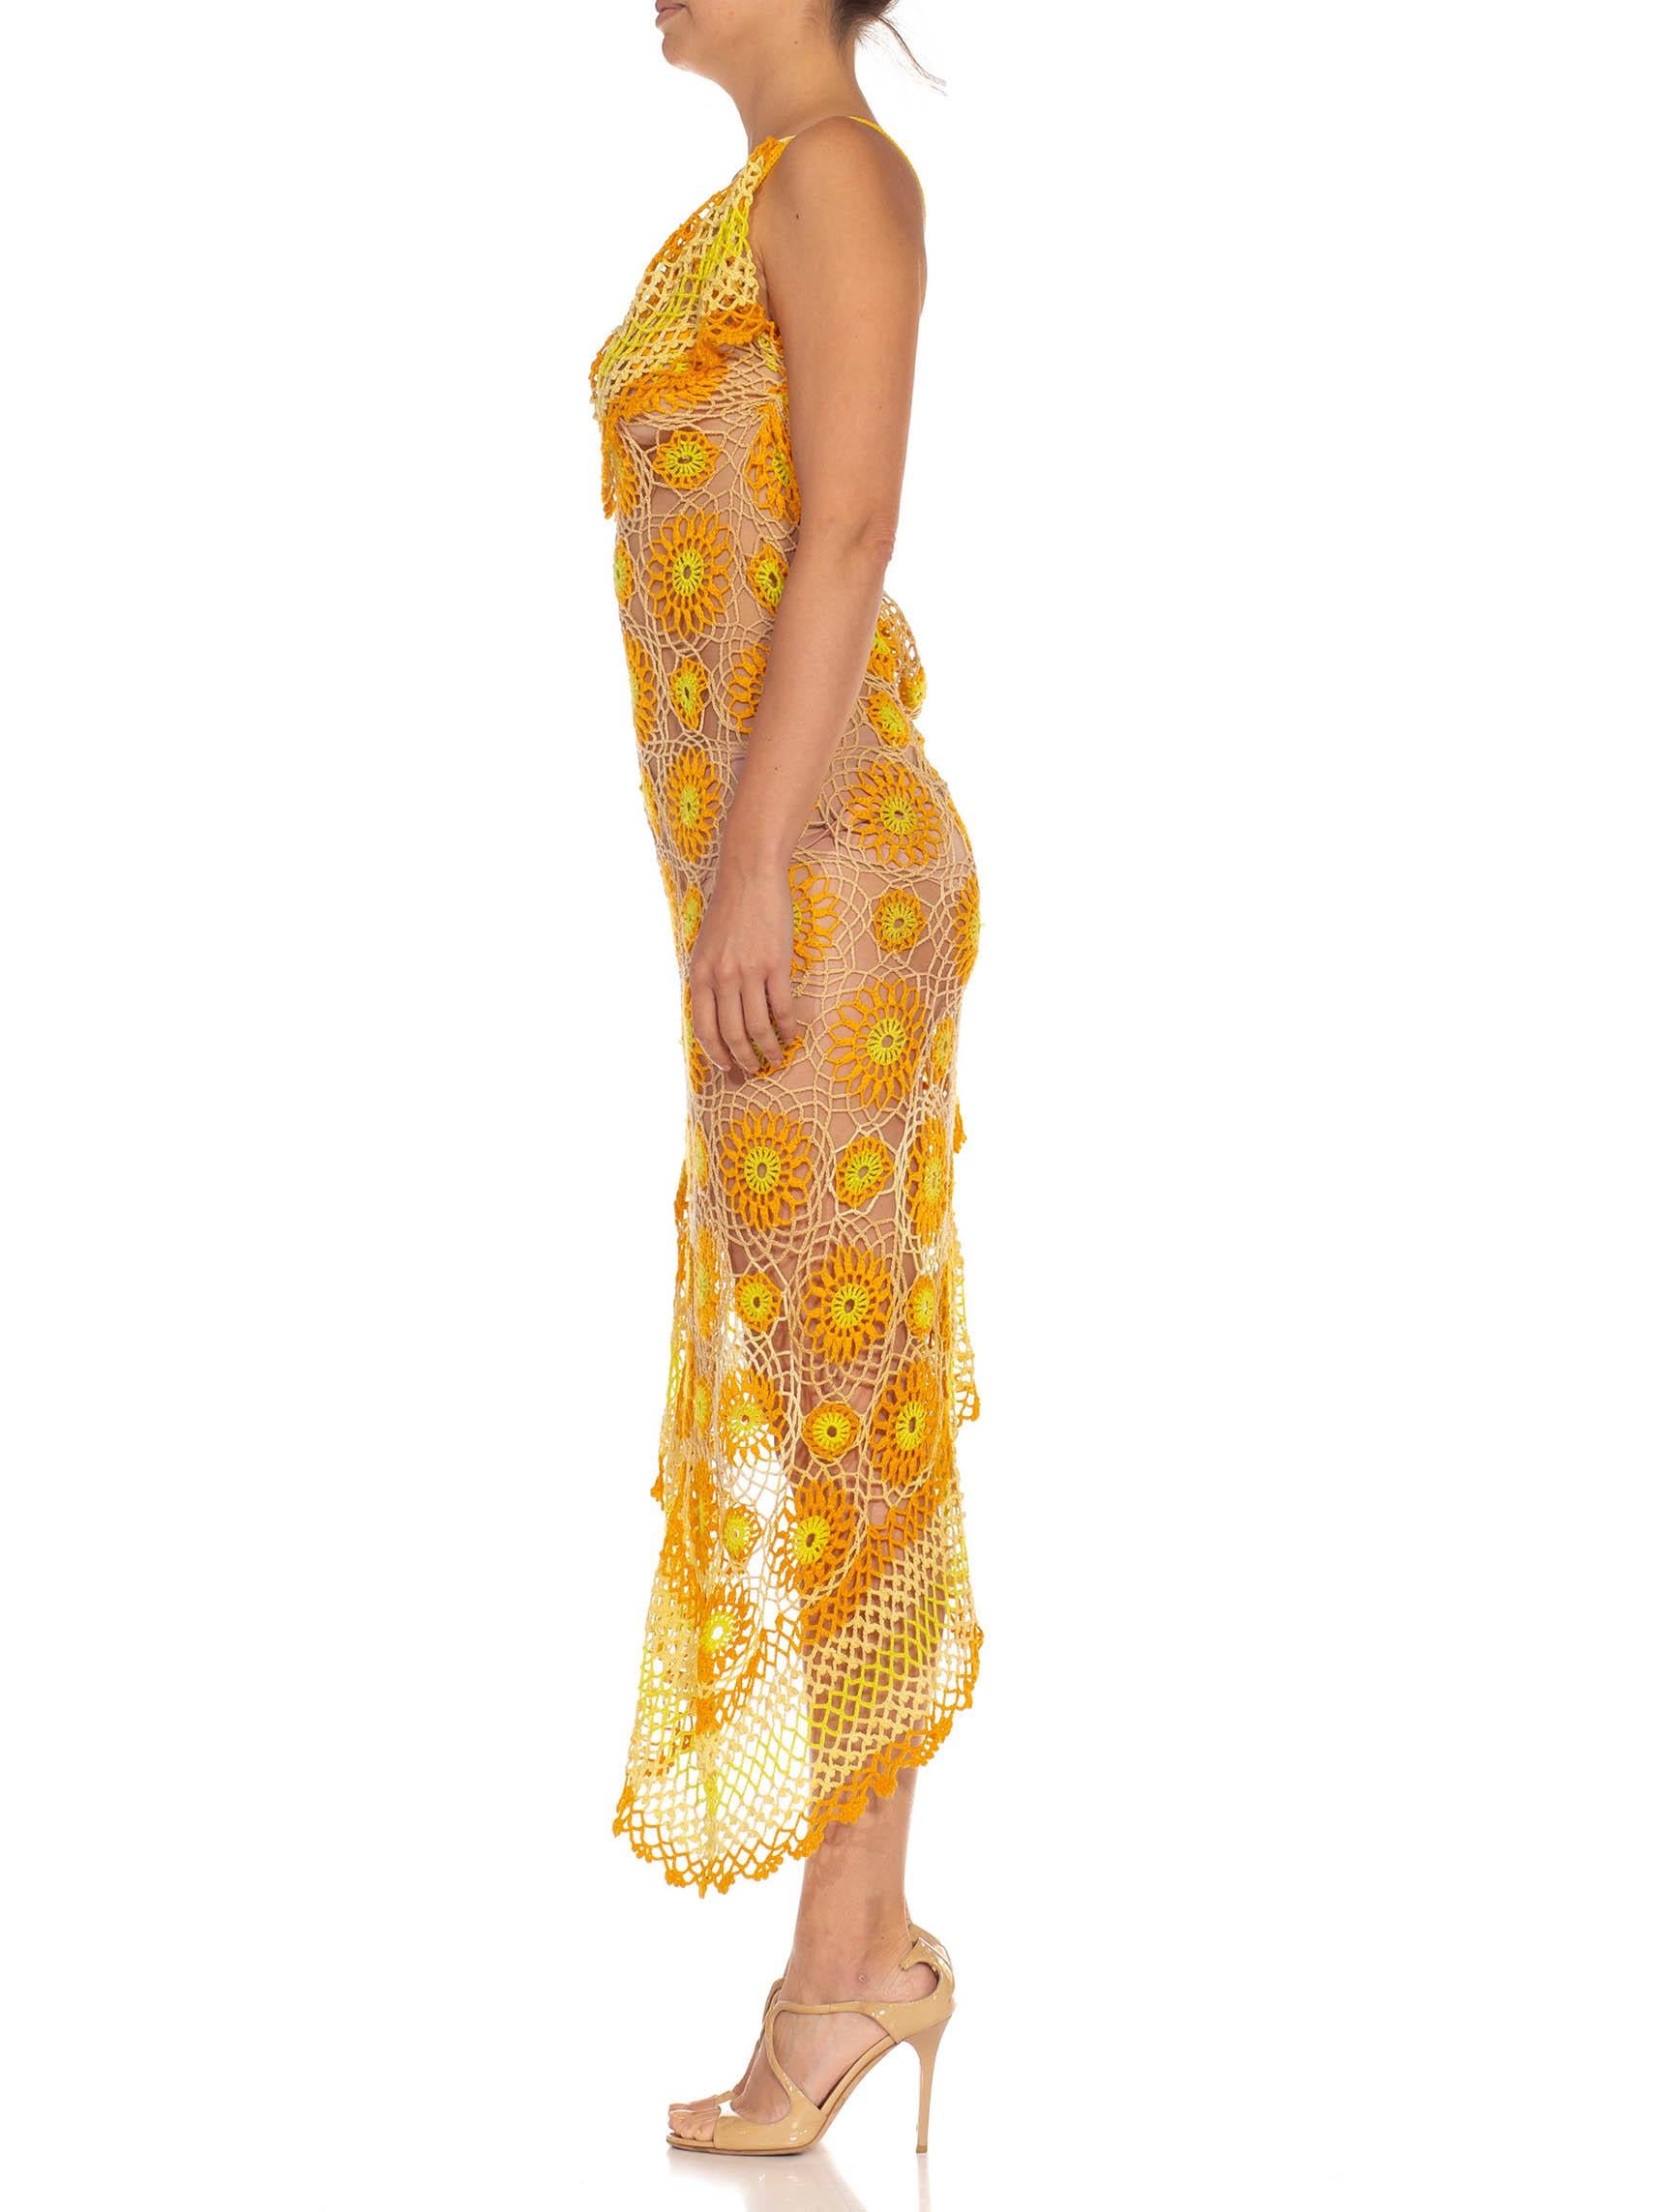 Morphew Collection Orange Yellow & White Cotton Floral Crochet Sexy Dress
MORPHEW COLLECTION is made entirely by hand in our NYC Ateliér of rare antique materials sourced from around the globe. Our sustainable vintage materials represent over a